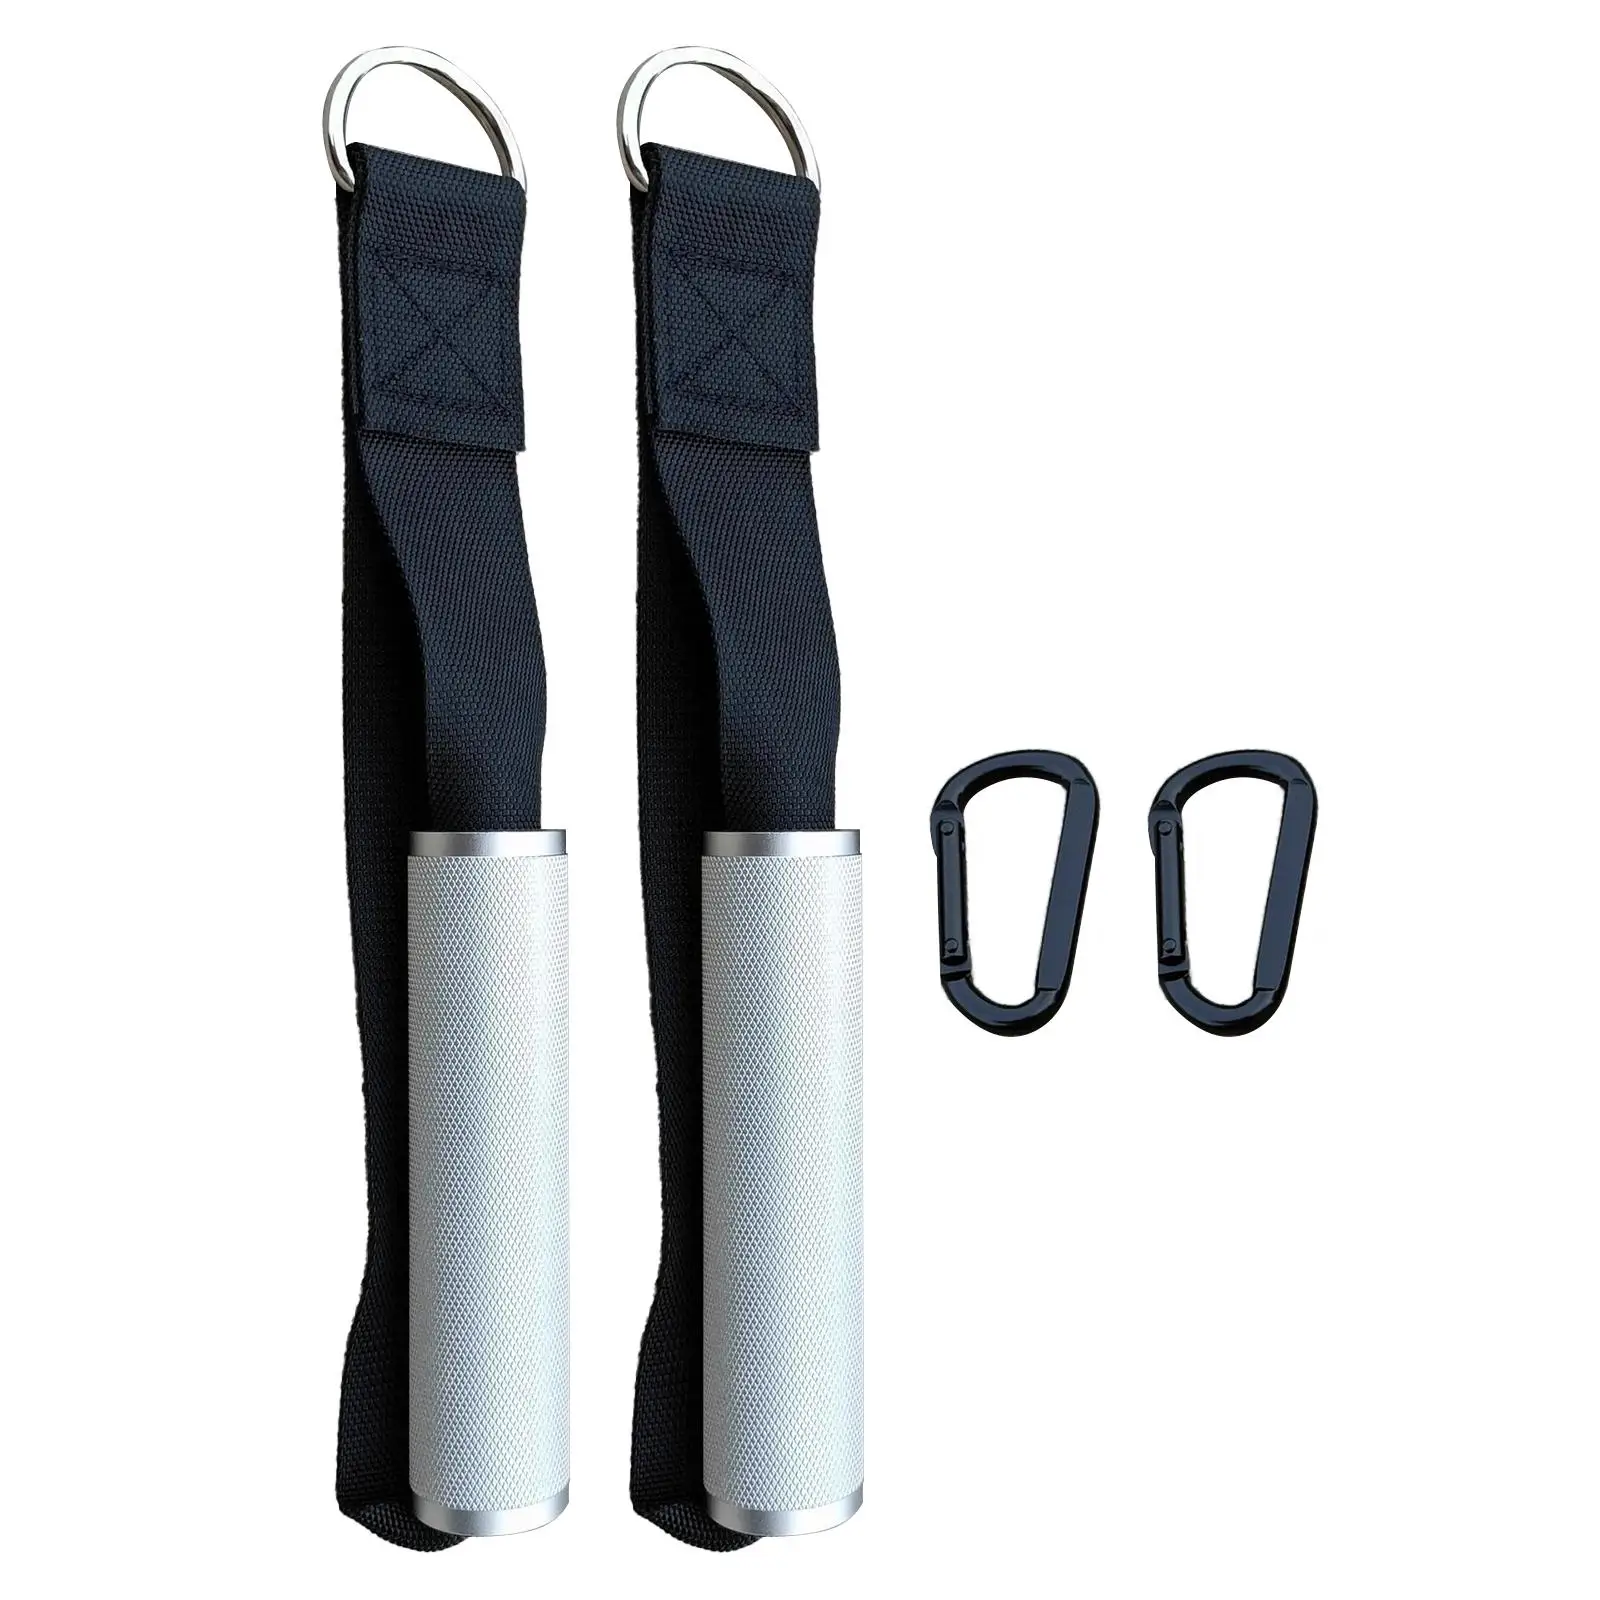 2 Pieces Gyms Handles Metal Accs Cable Attachment Gymnastics Hanging Universal Exercise Device for Strength Trainer Pilates